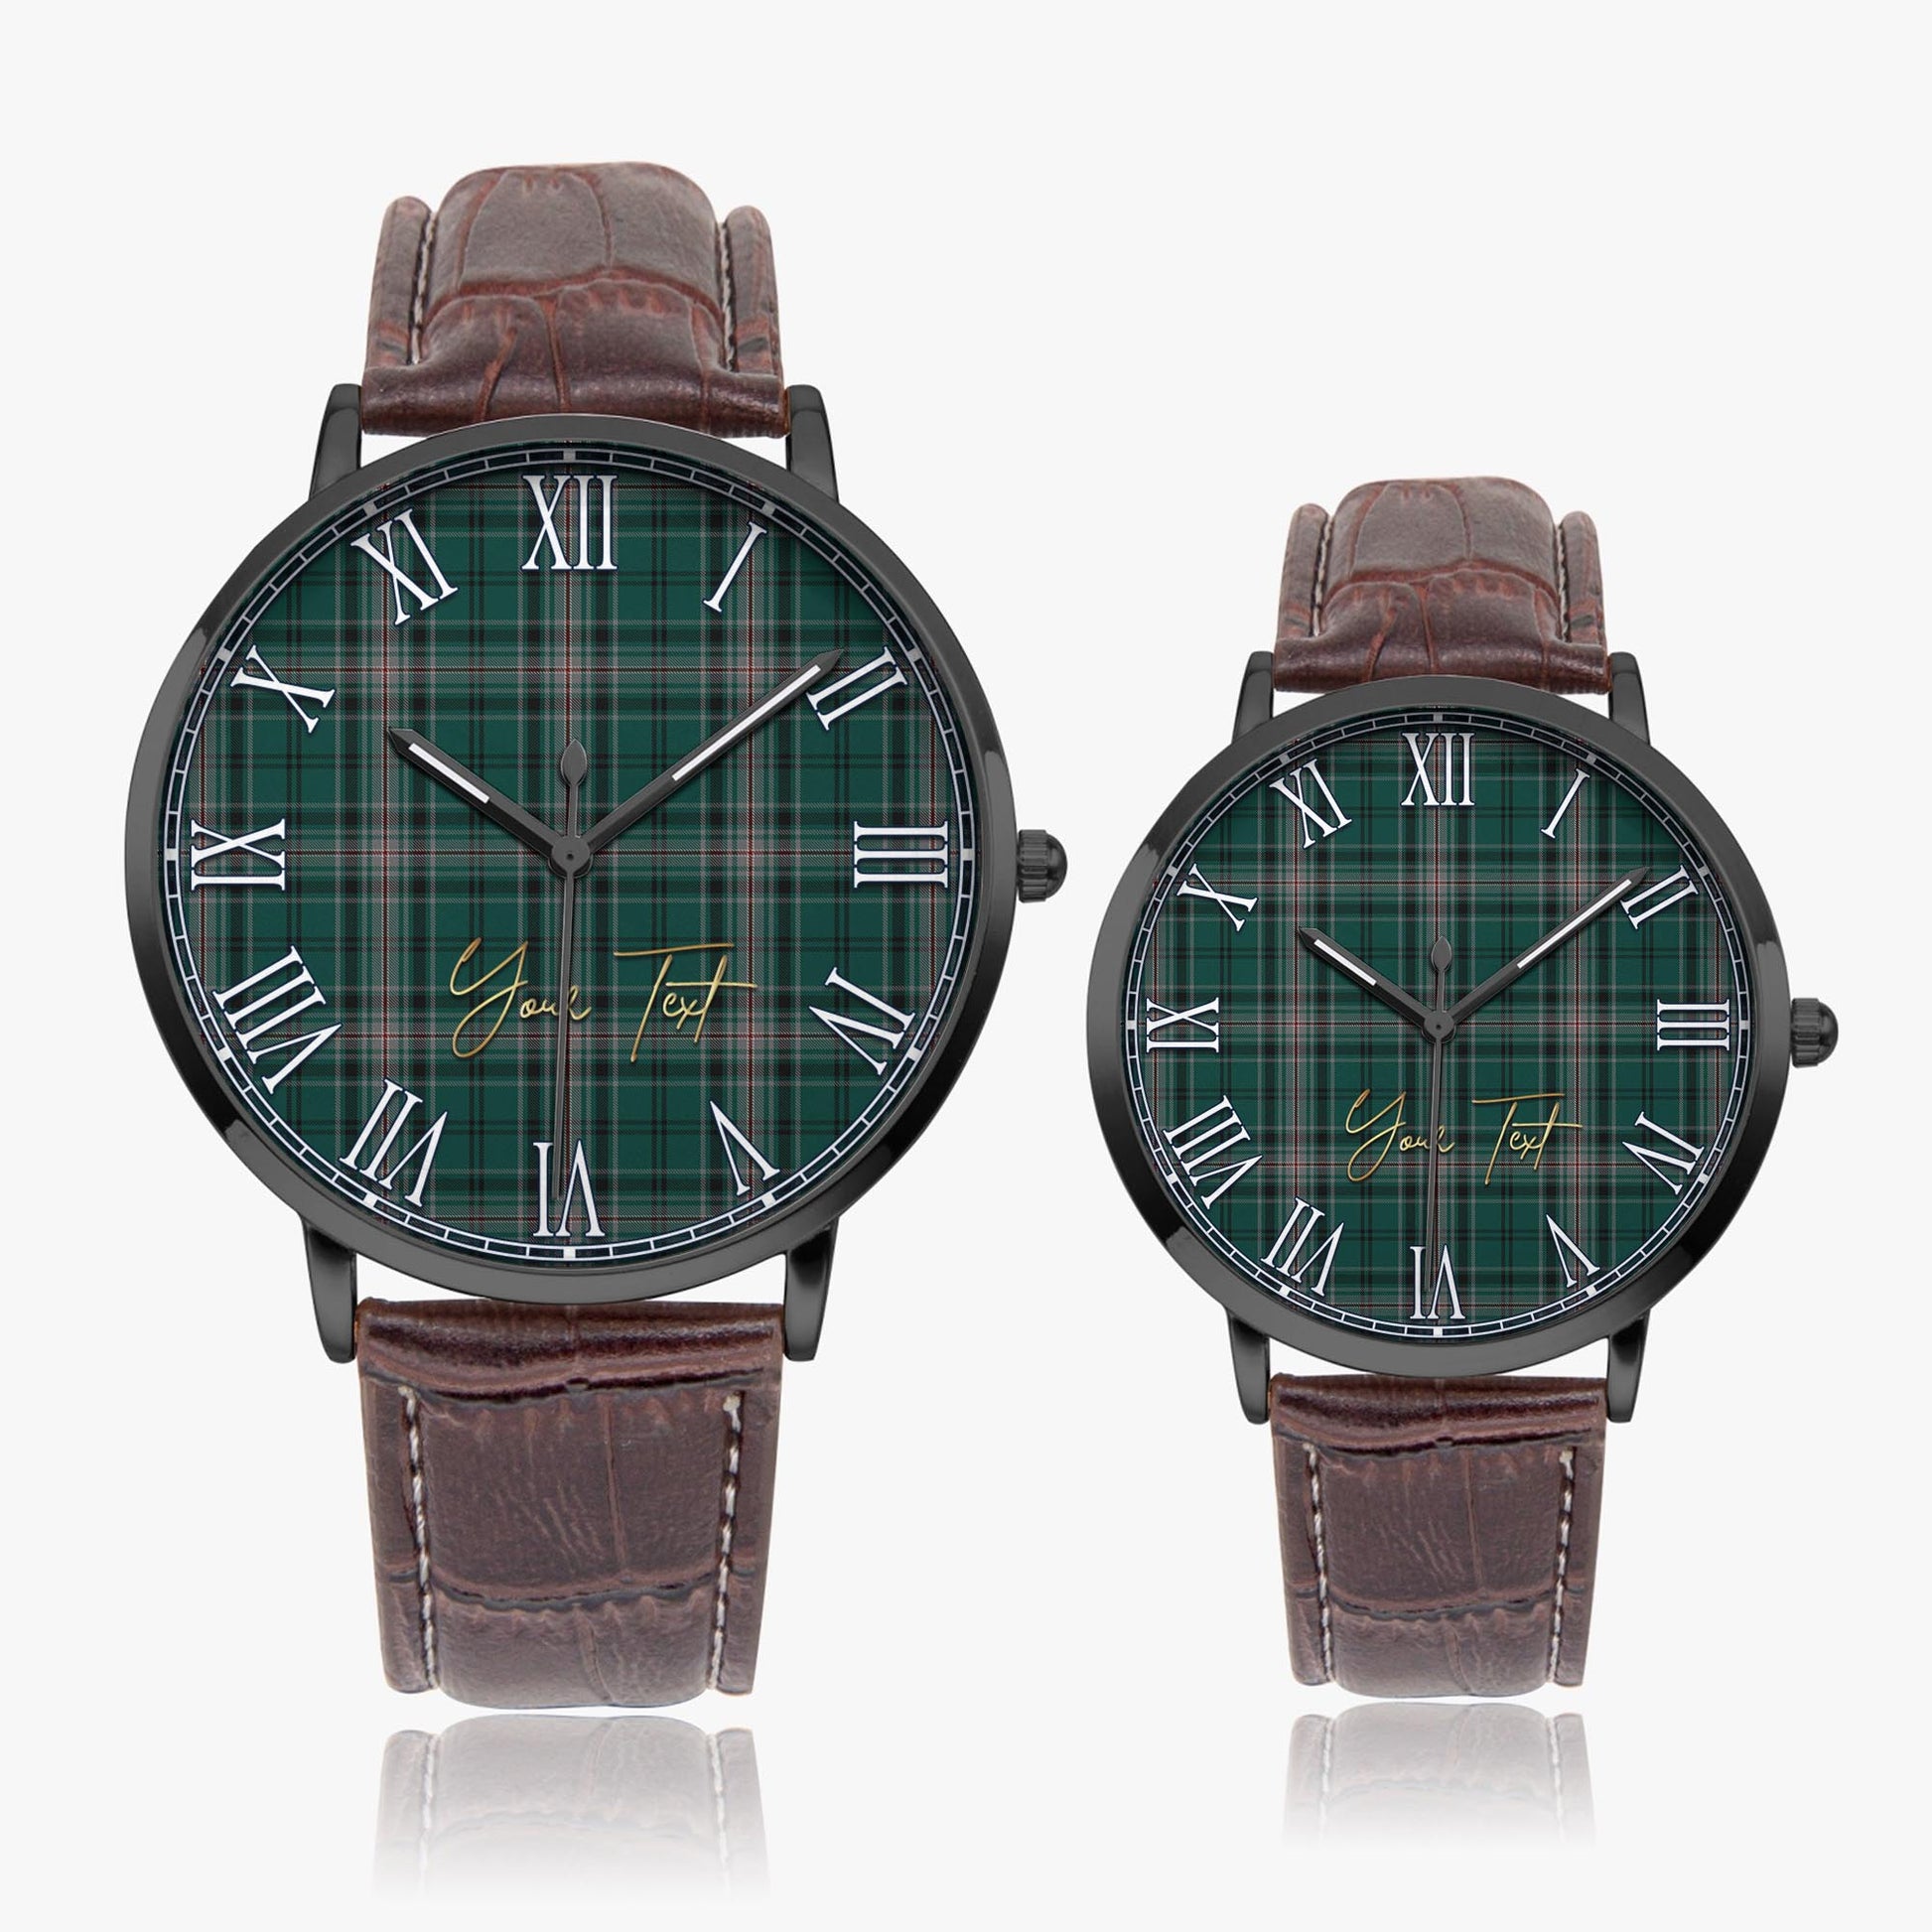 Kelly of Sleat Hunting Tartan Personalized Your Text Leather Trap Quartz Watch Ultra Thin Black Case With Brown Leather Strap - Tartanvibesclothing